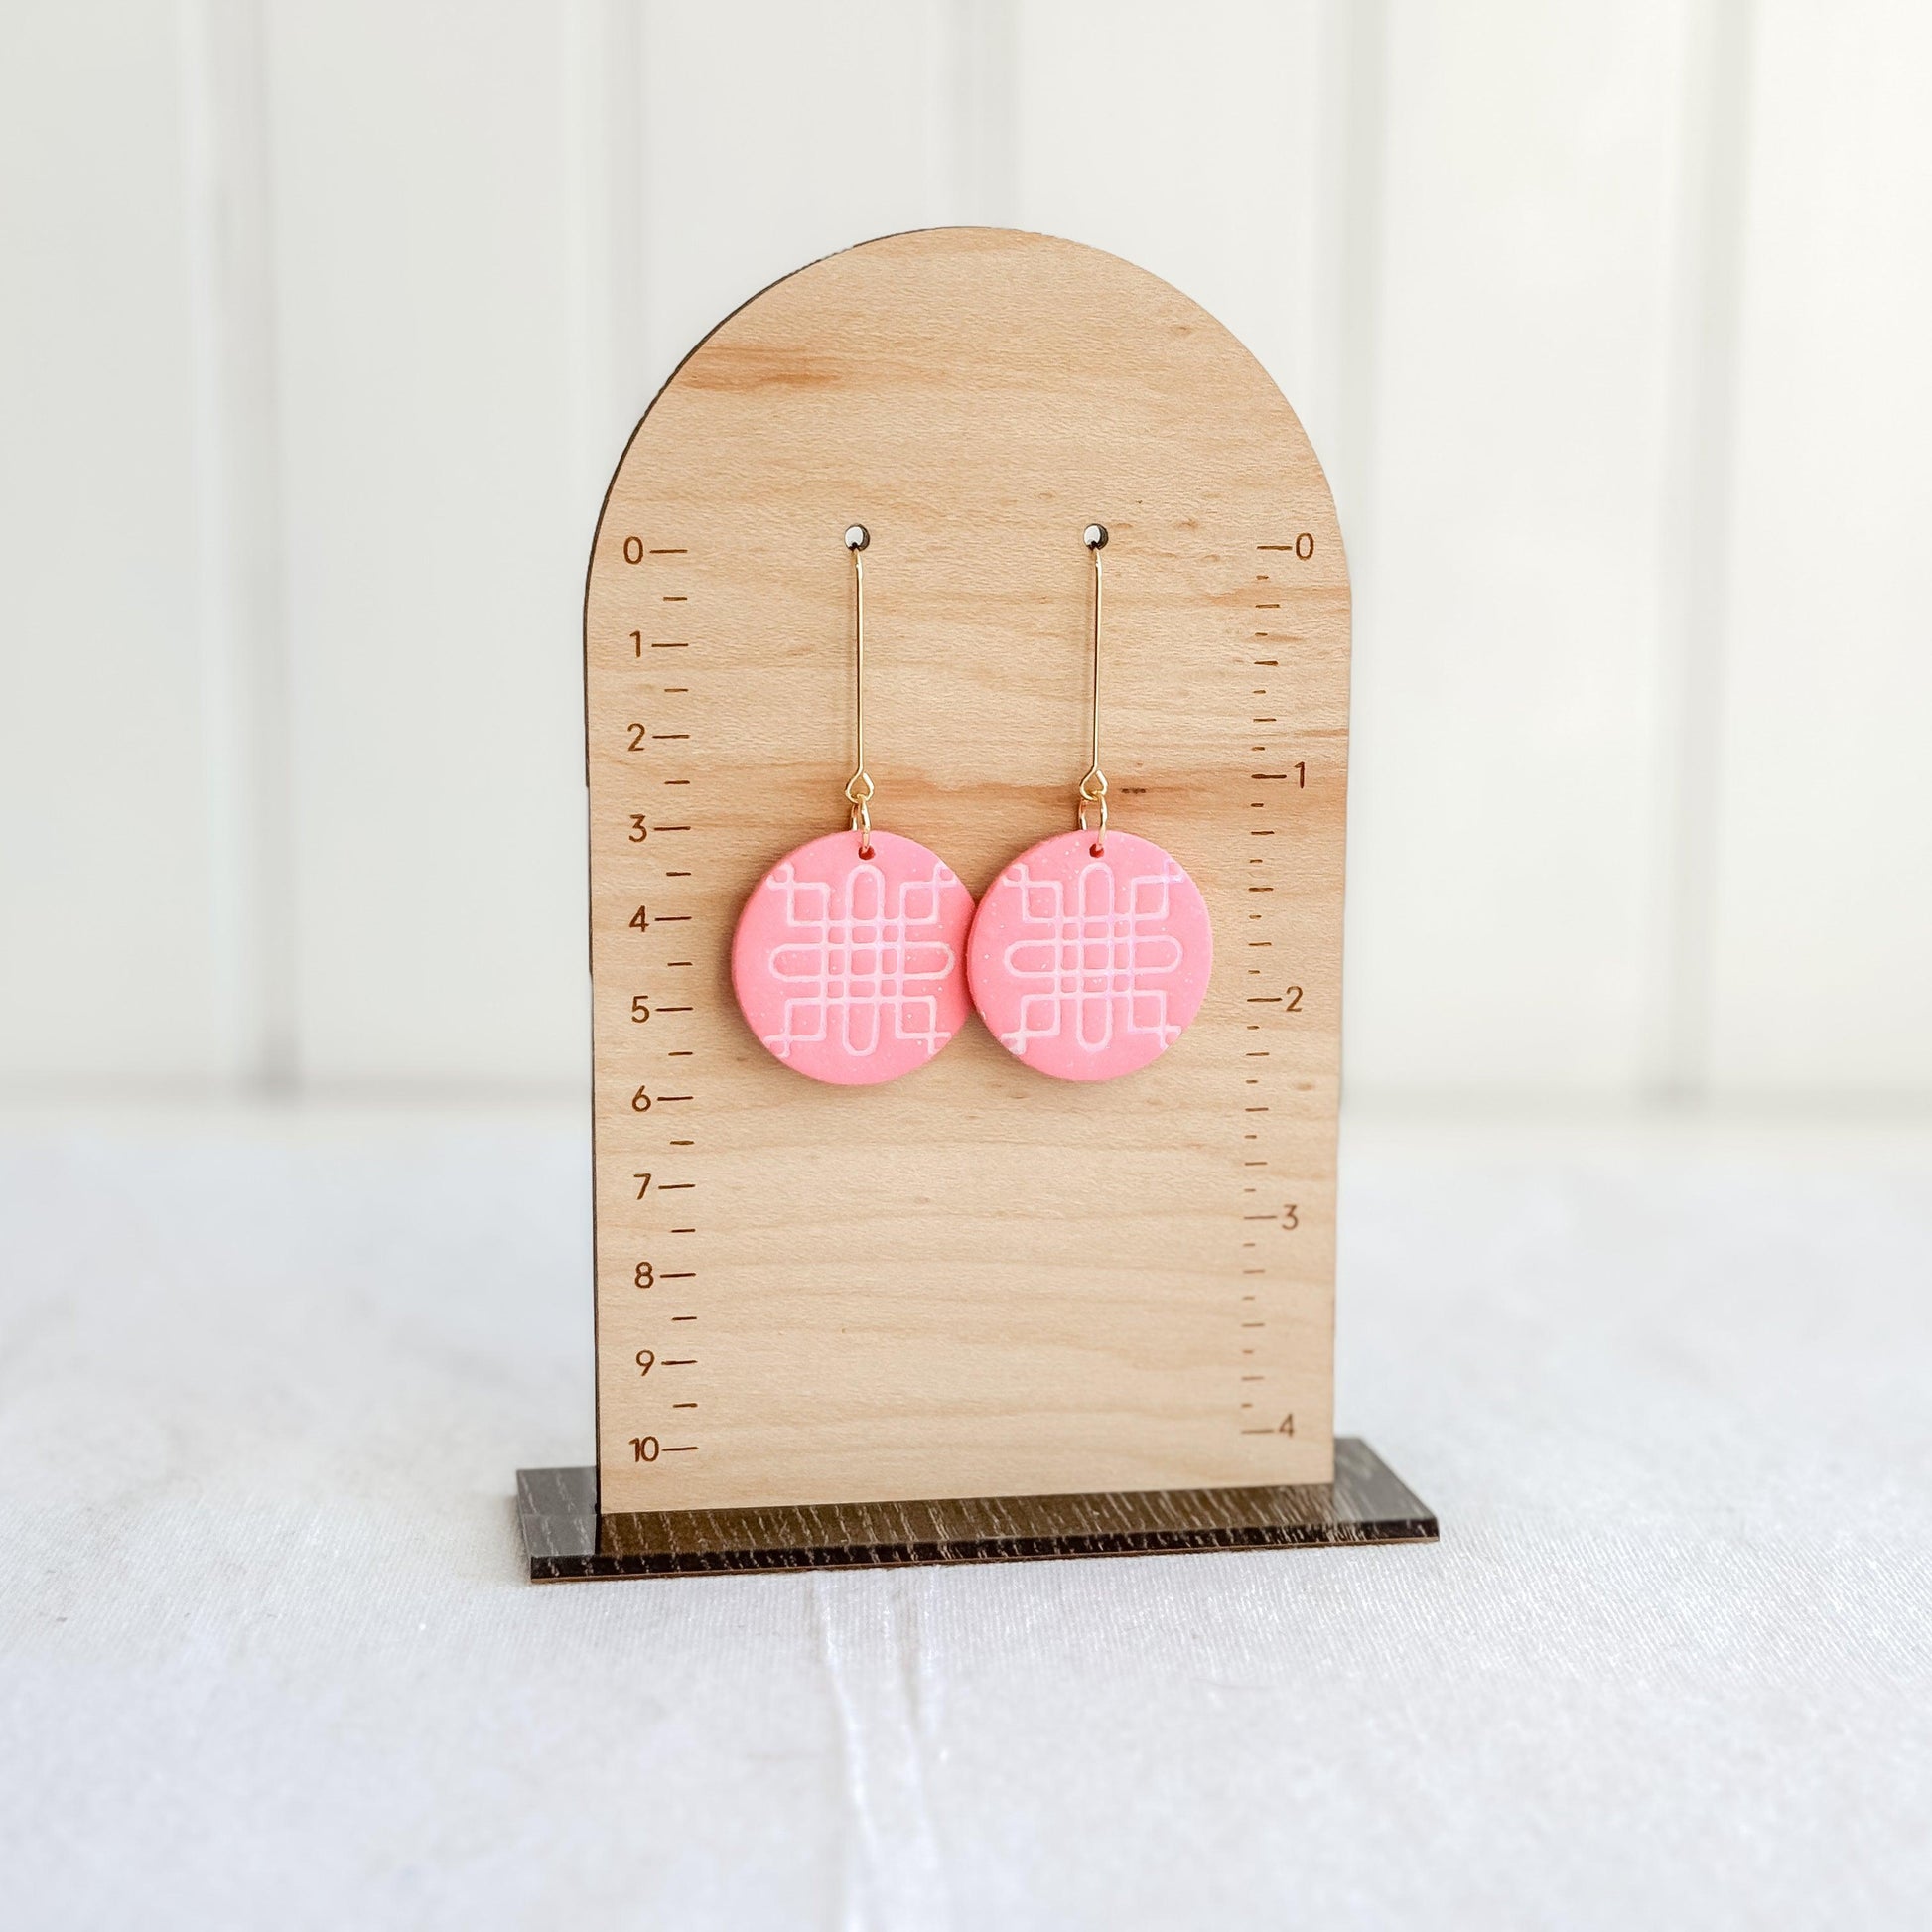 Pink Earrings, Polymer Clay Earrings, Birthday Gift for Friend, Handmade Earrings, Minimalist Drop Earrings, Gifts for Mom, Surgical Steel - Harbor to Gulf Co.